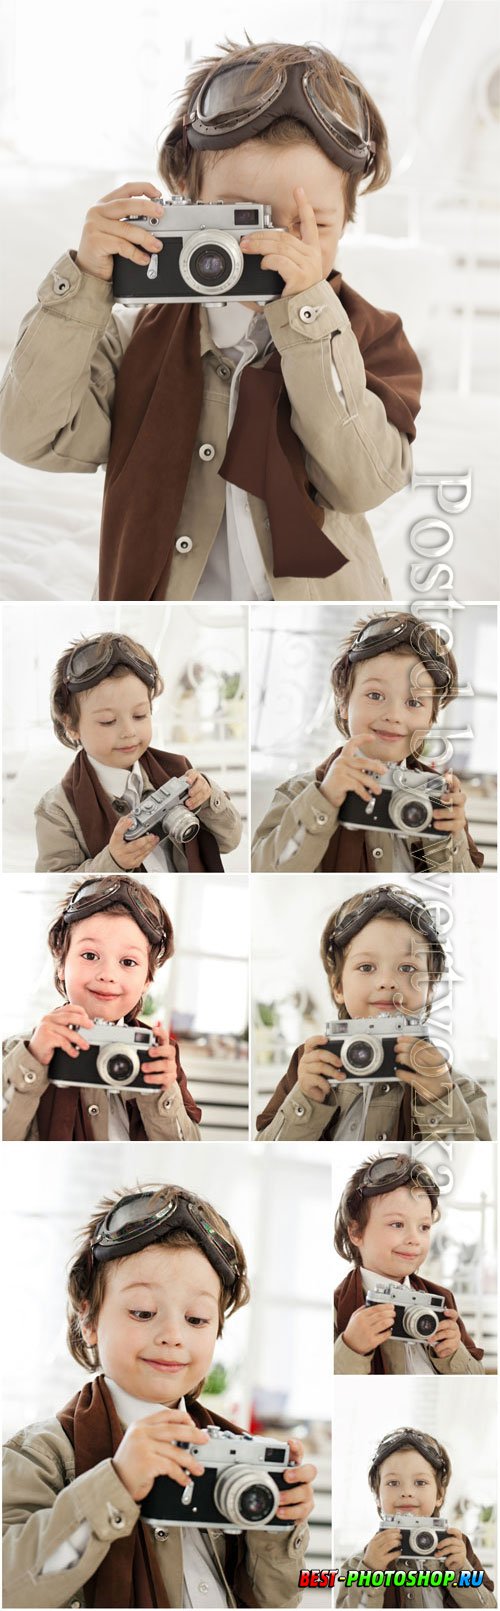 Handsome boy with camera stock photo